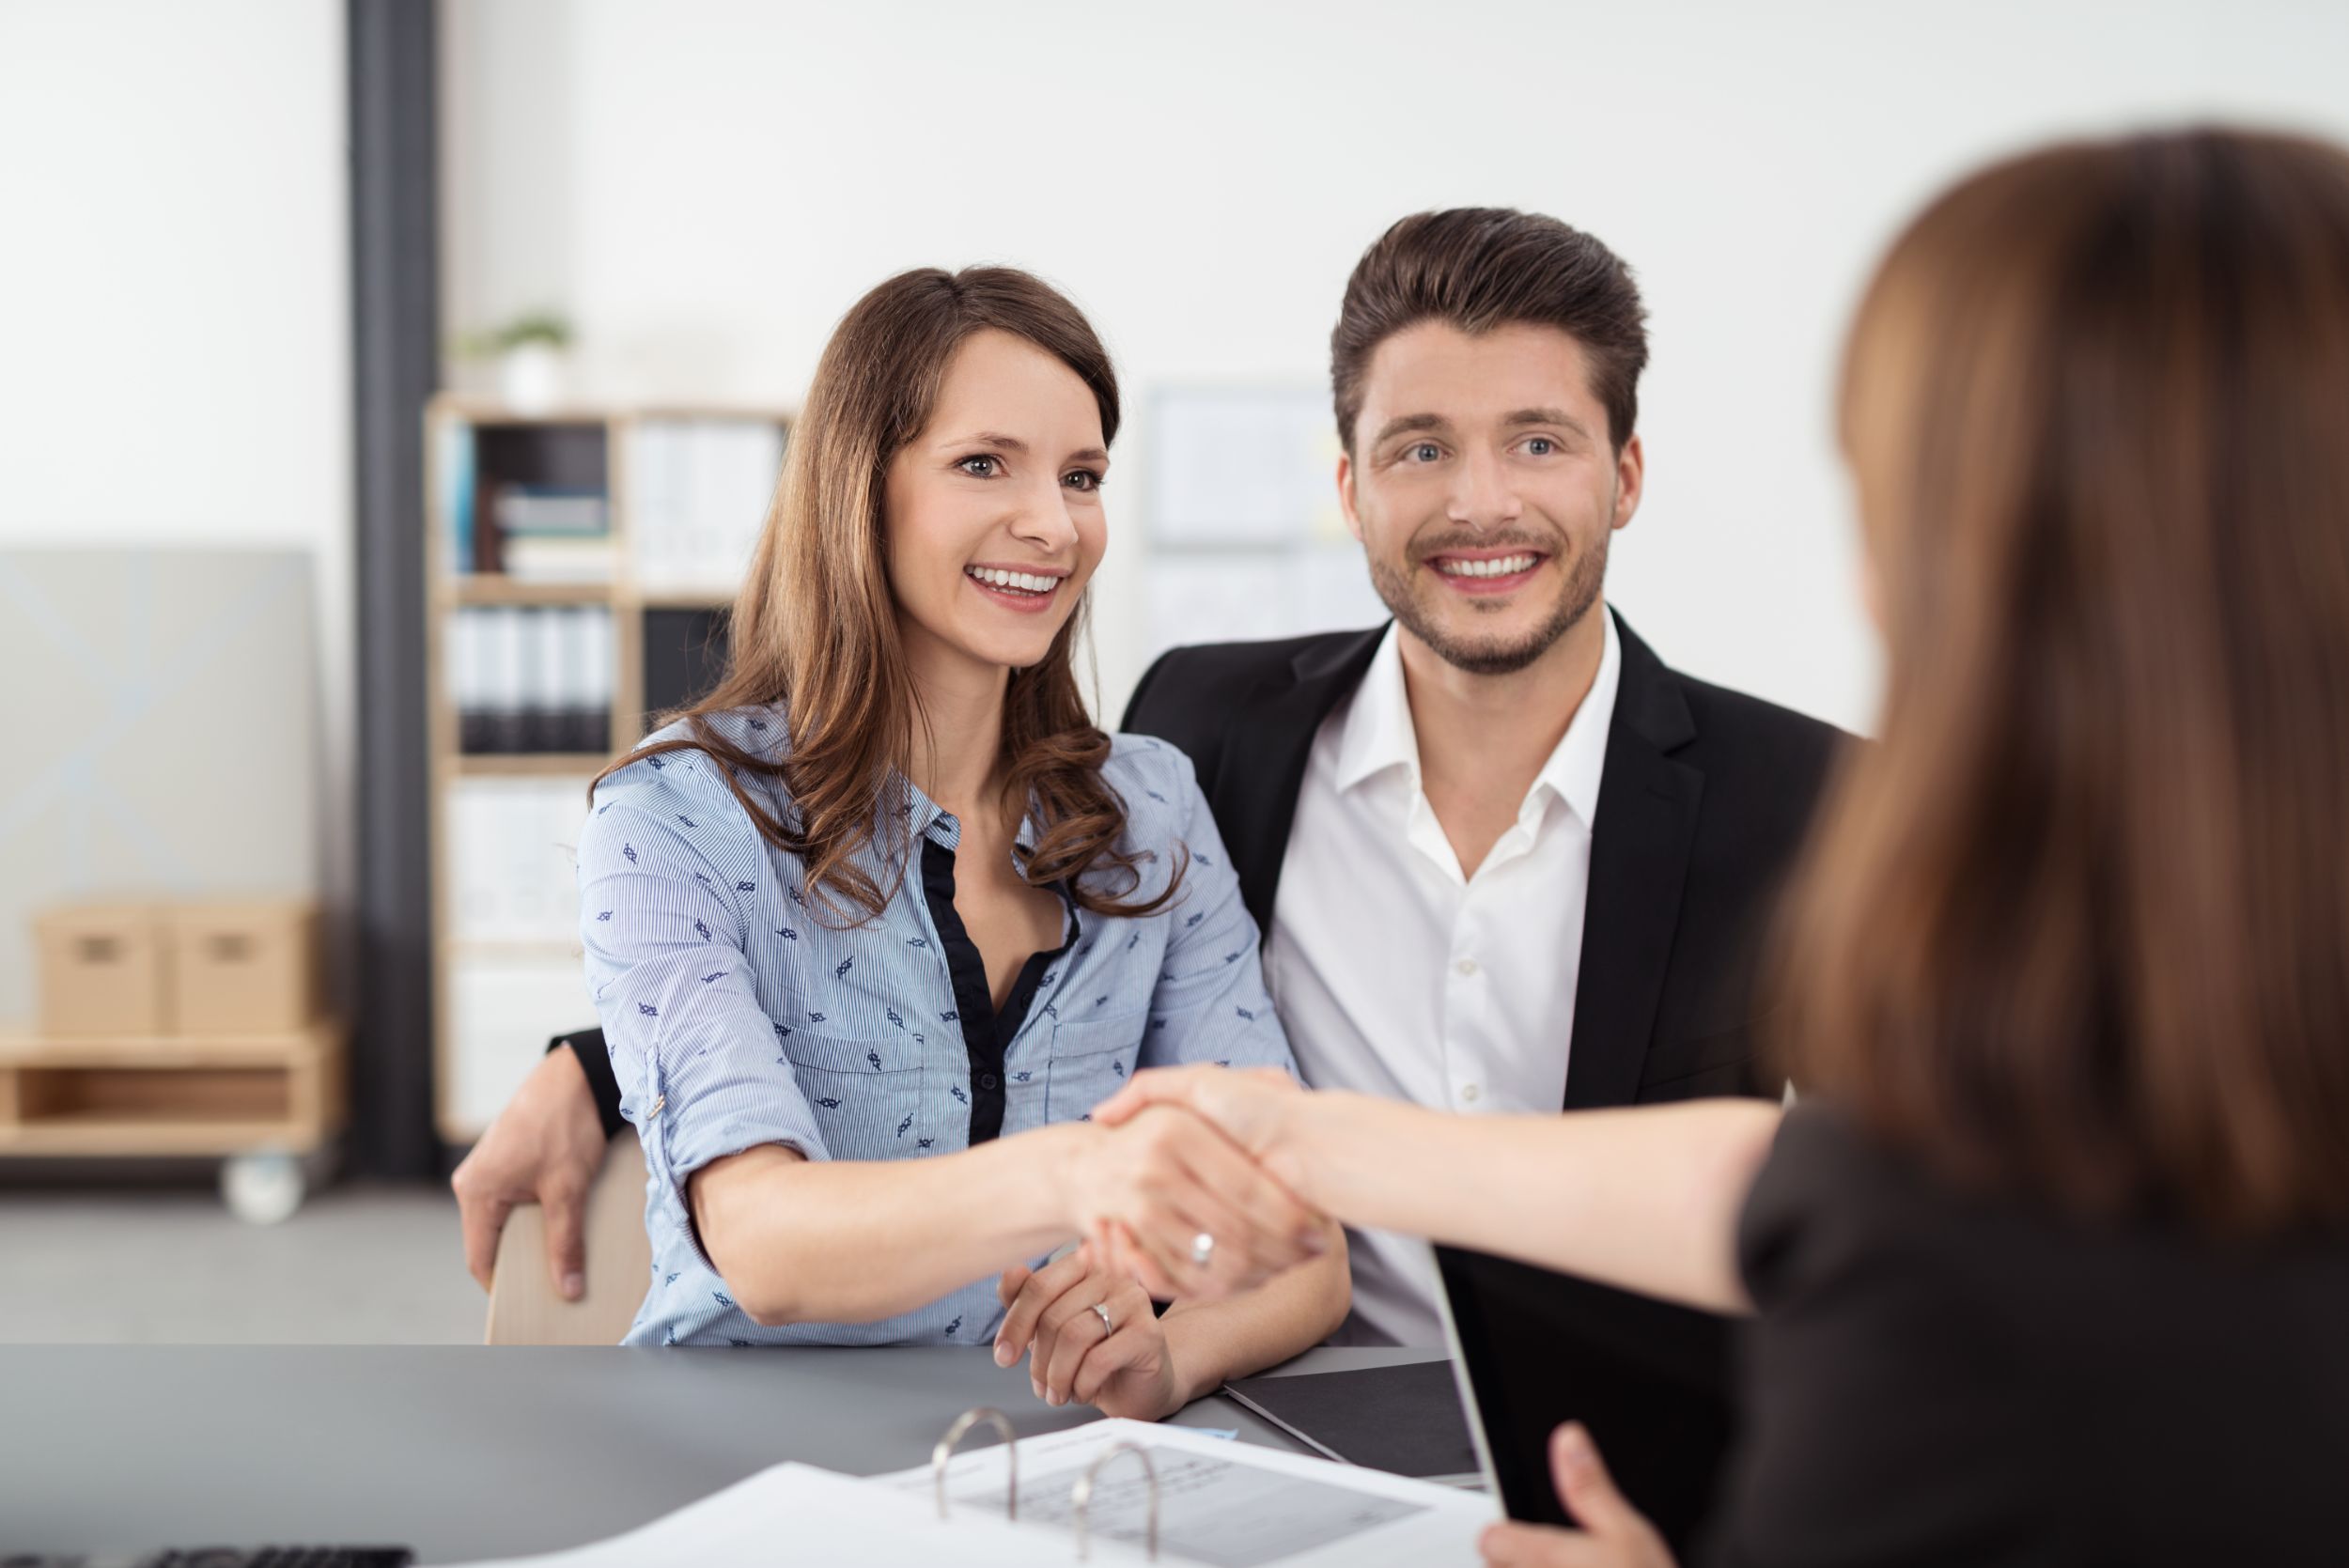 Happy Young Professional Couple Shaking Hands with a Real Estate Agent After Some Business Discussions Inside the Office